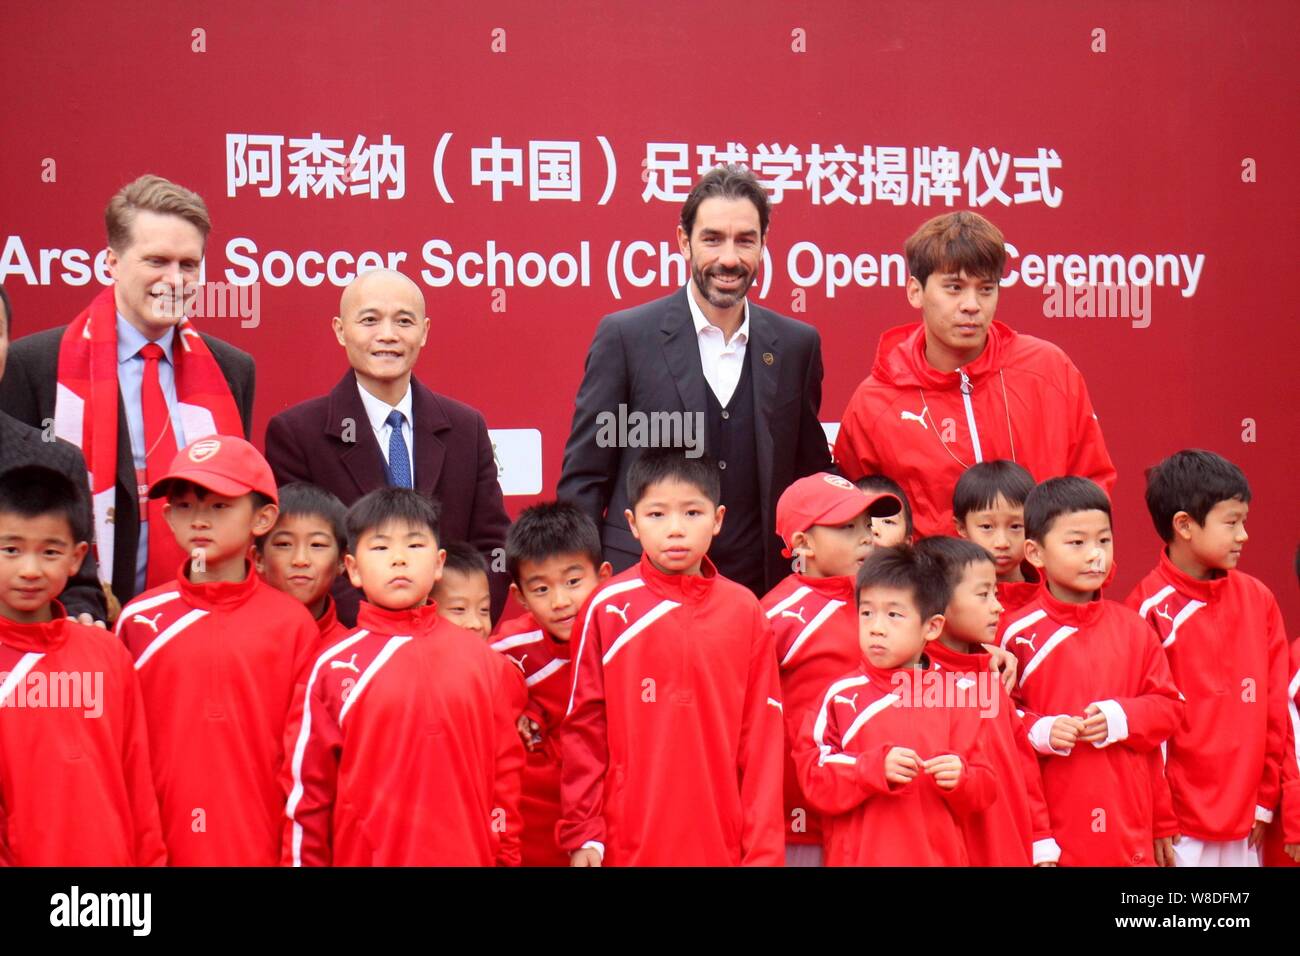 Retired French football player Robert Pires, back second right, poses with children during the opening ceremony of the Arsenal Soccer School (China) i Stock Photo